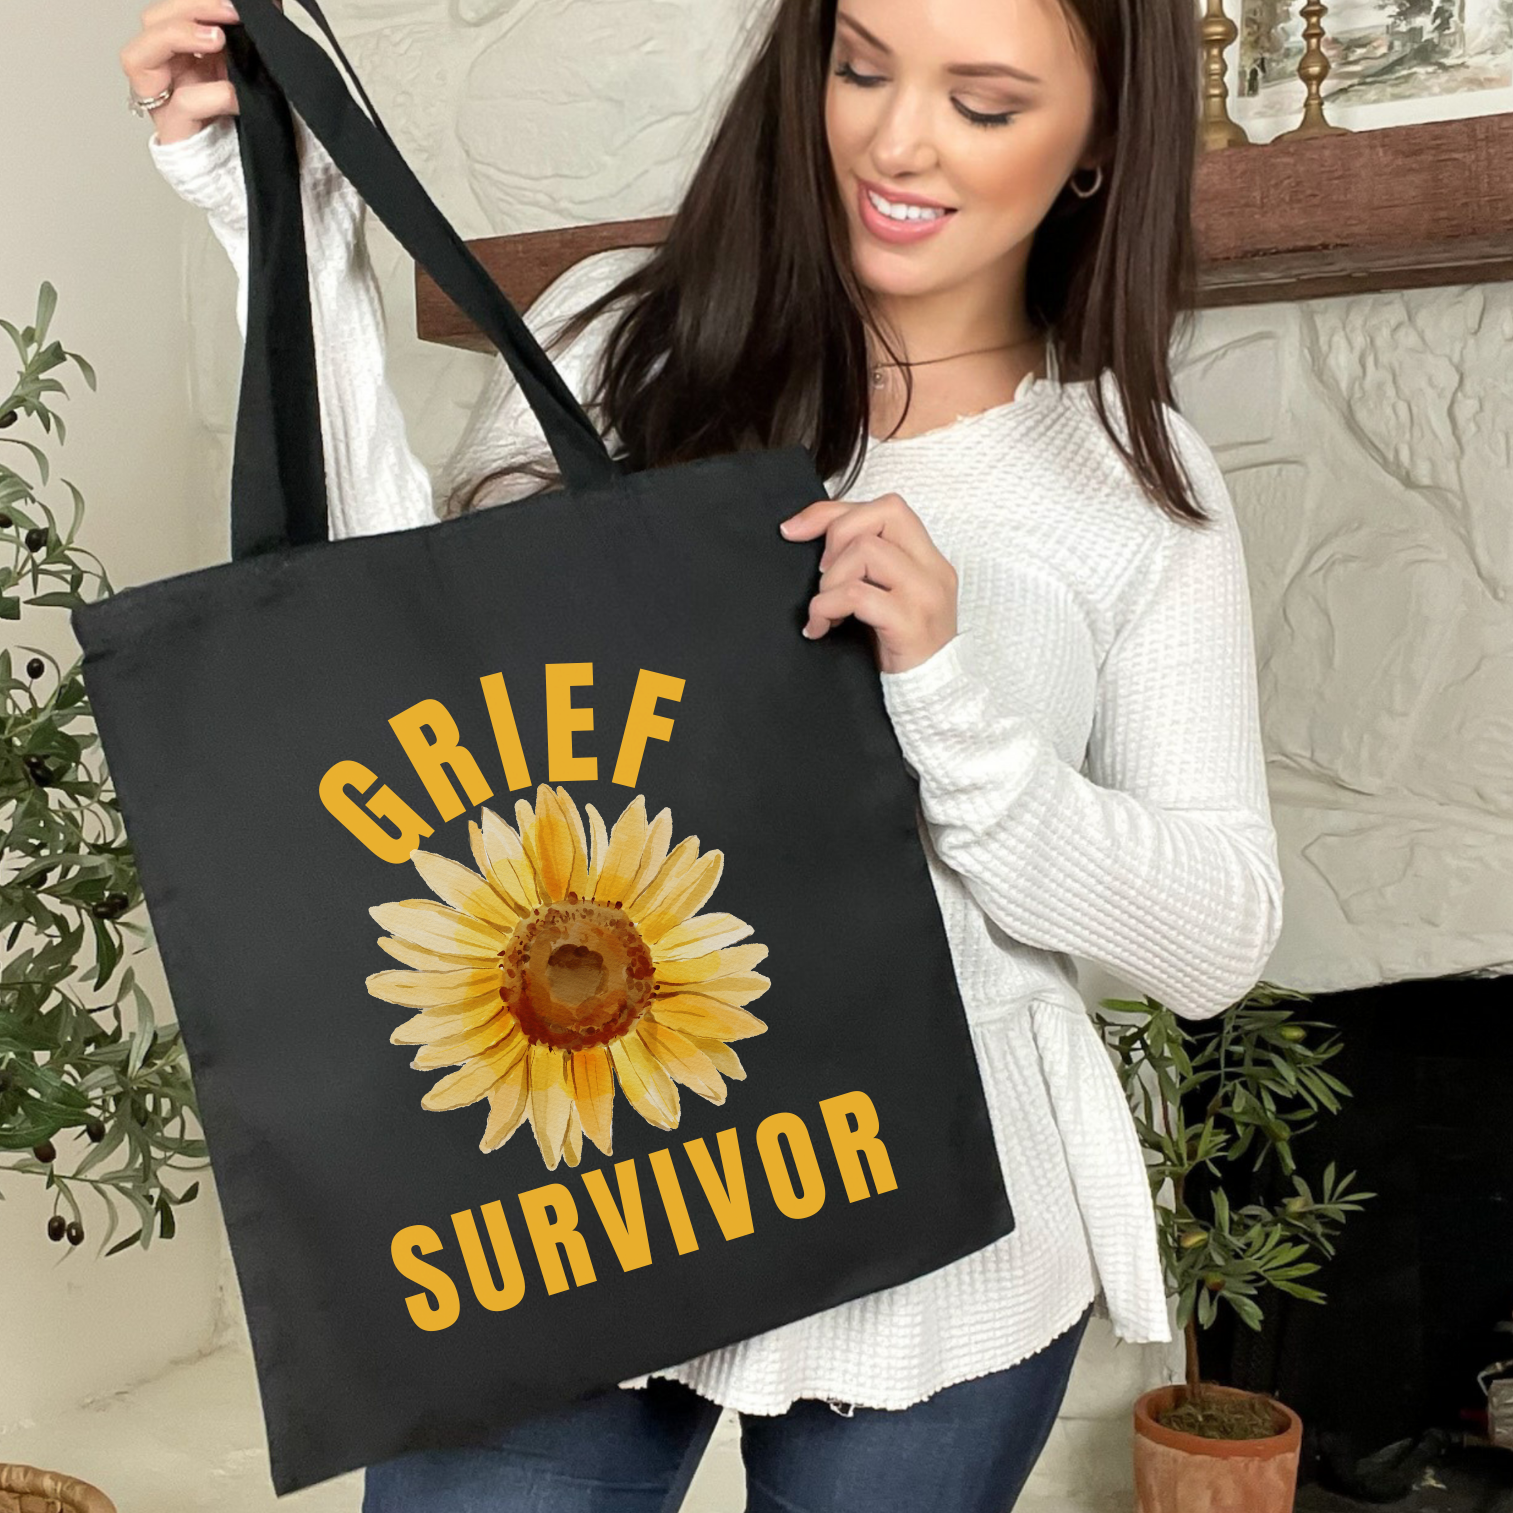 Black Grief Survivor Tote Bag with sunflower graphic. Unique and compassionate sympathy gift.